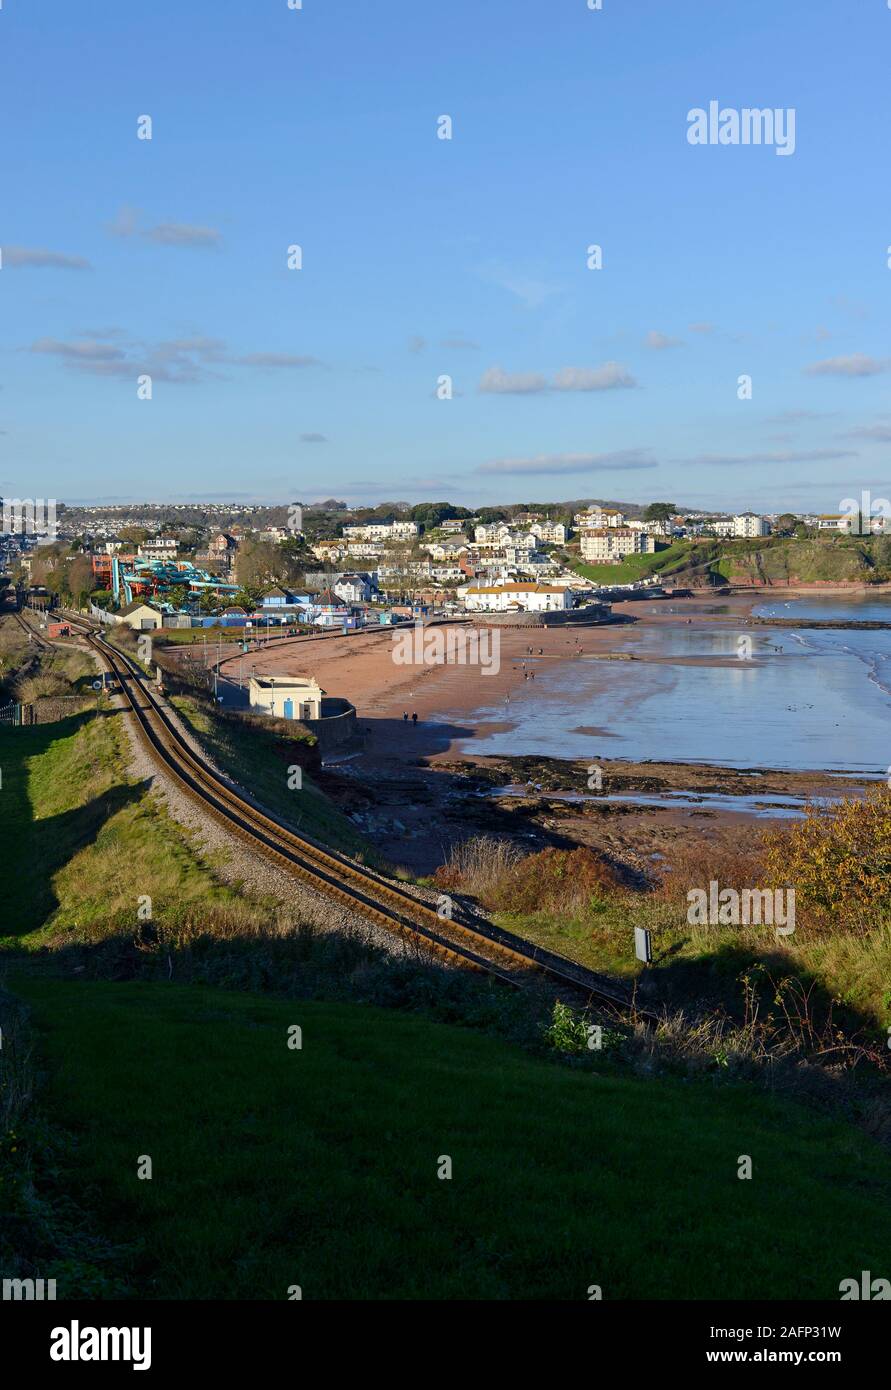 View of Goodrington Sands, Paignton, Devon, from the south, with the track of the Paignton and Dartmouth steam railway in the foreground. Stock Photo